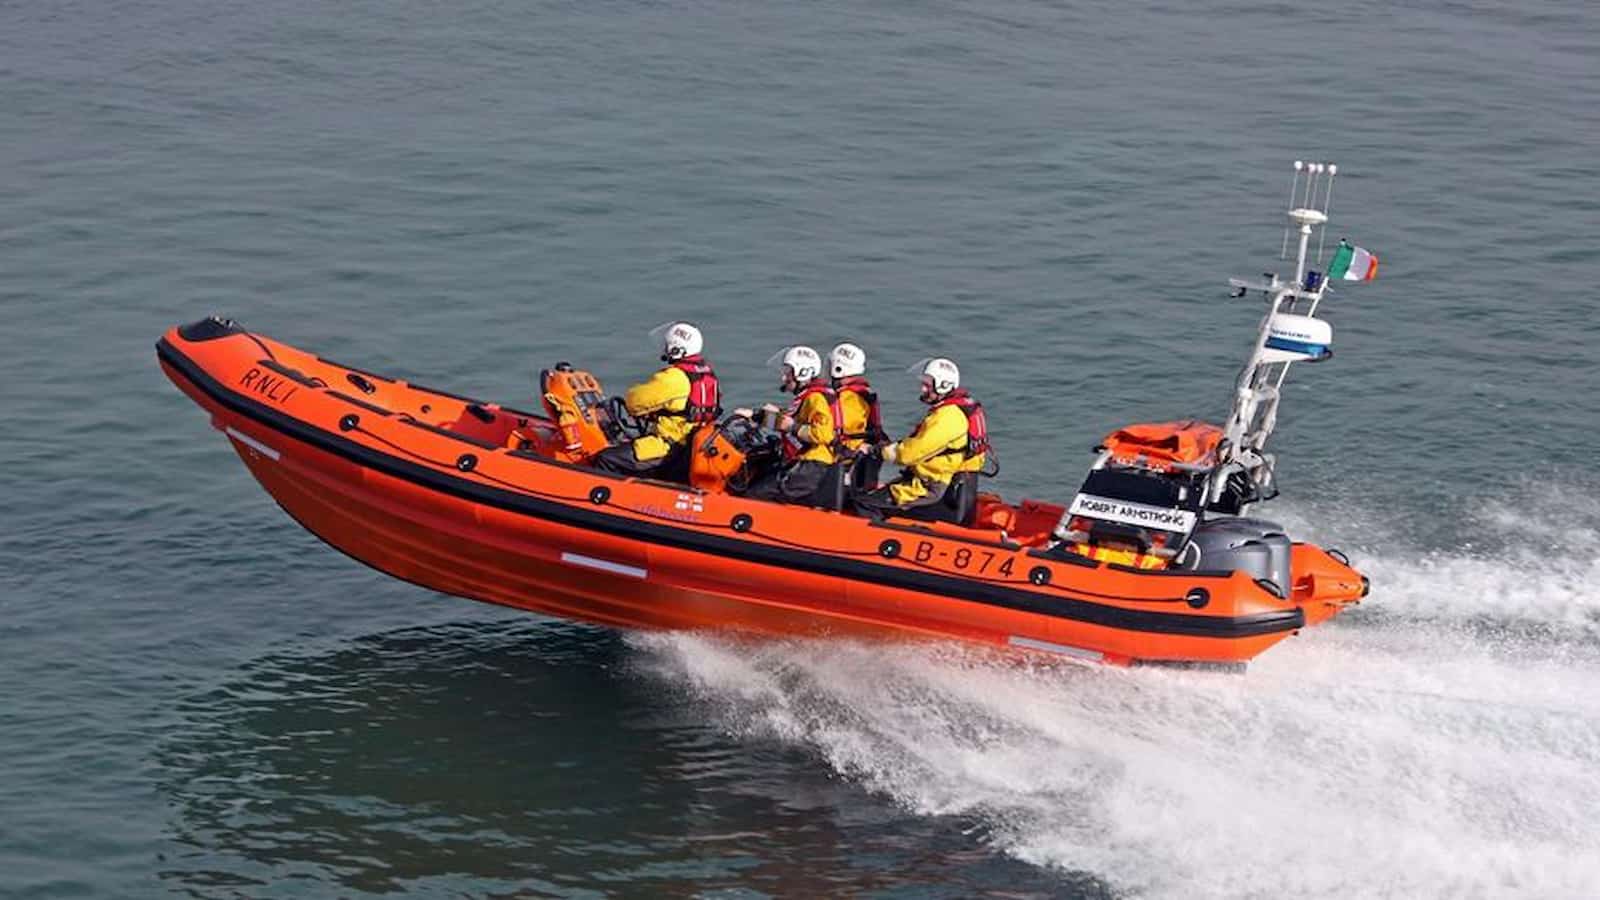 Lifeboats on Cruise Ships, Cruise Ships Lifeboat, Fast Rescue Boats